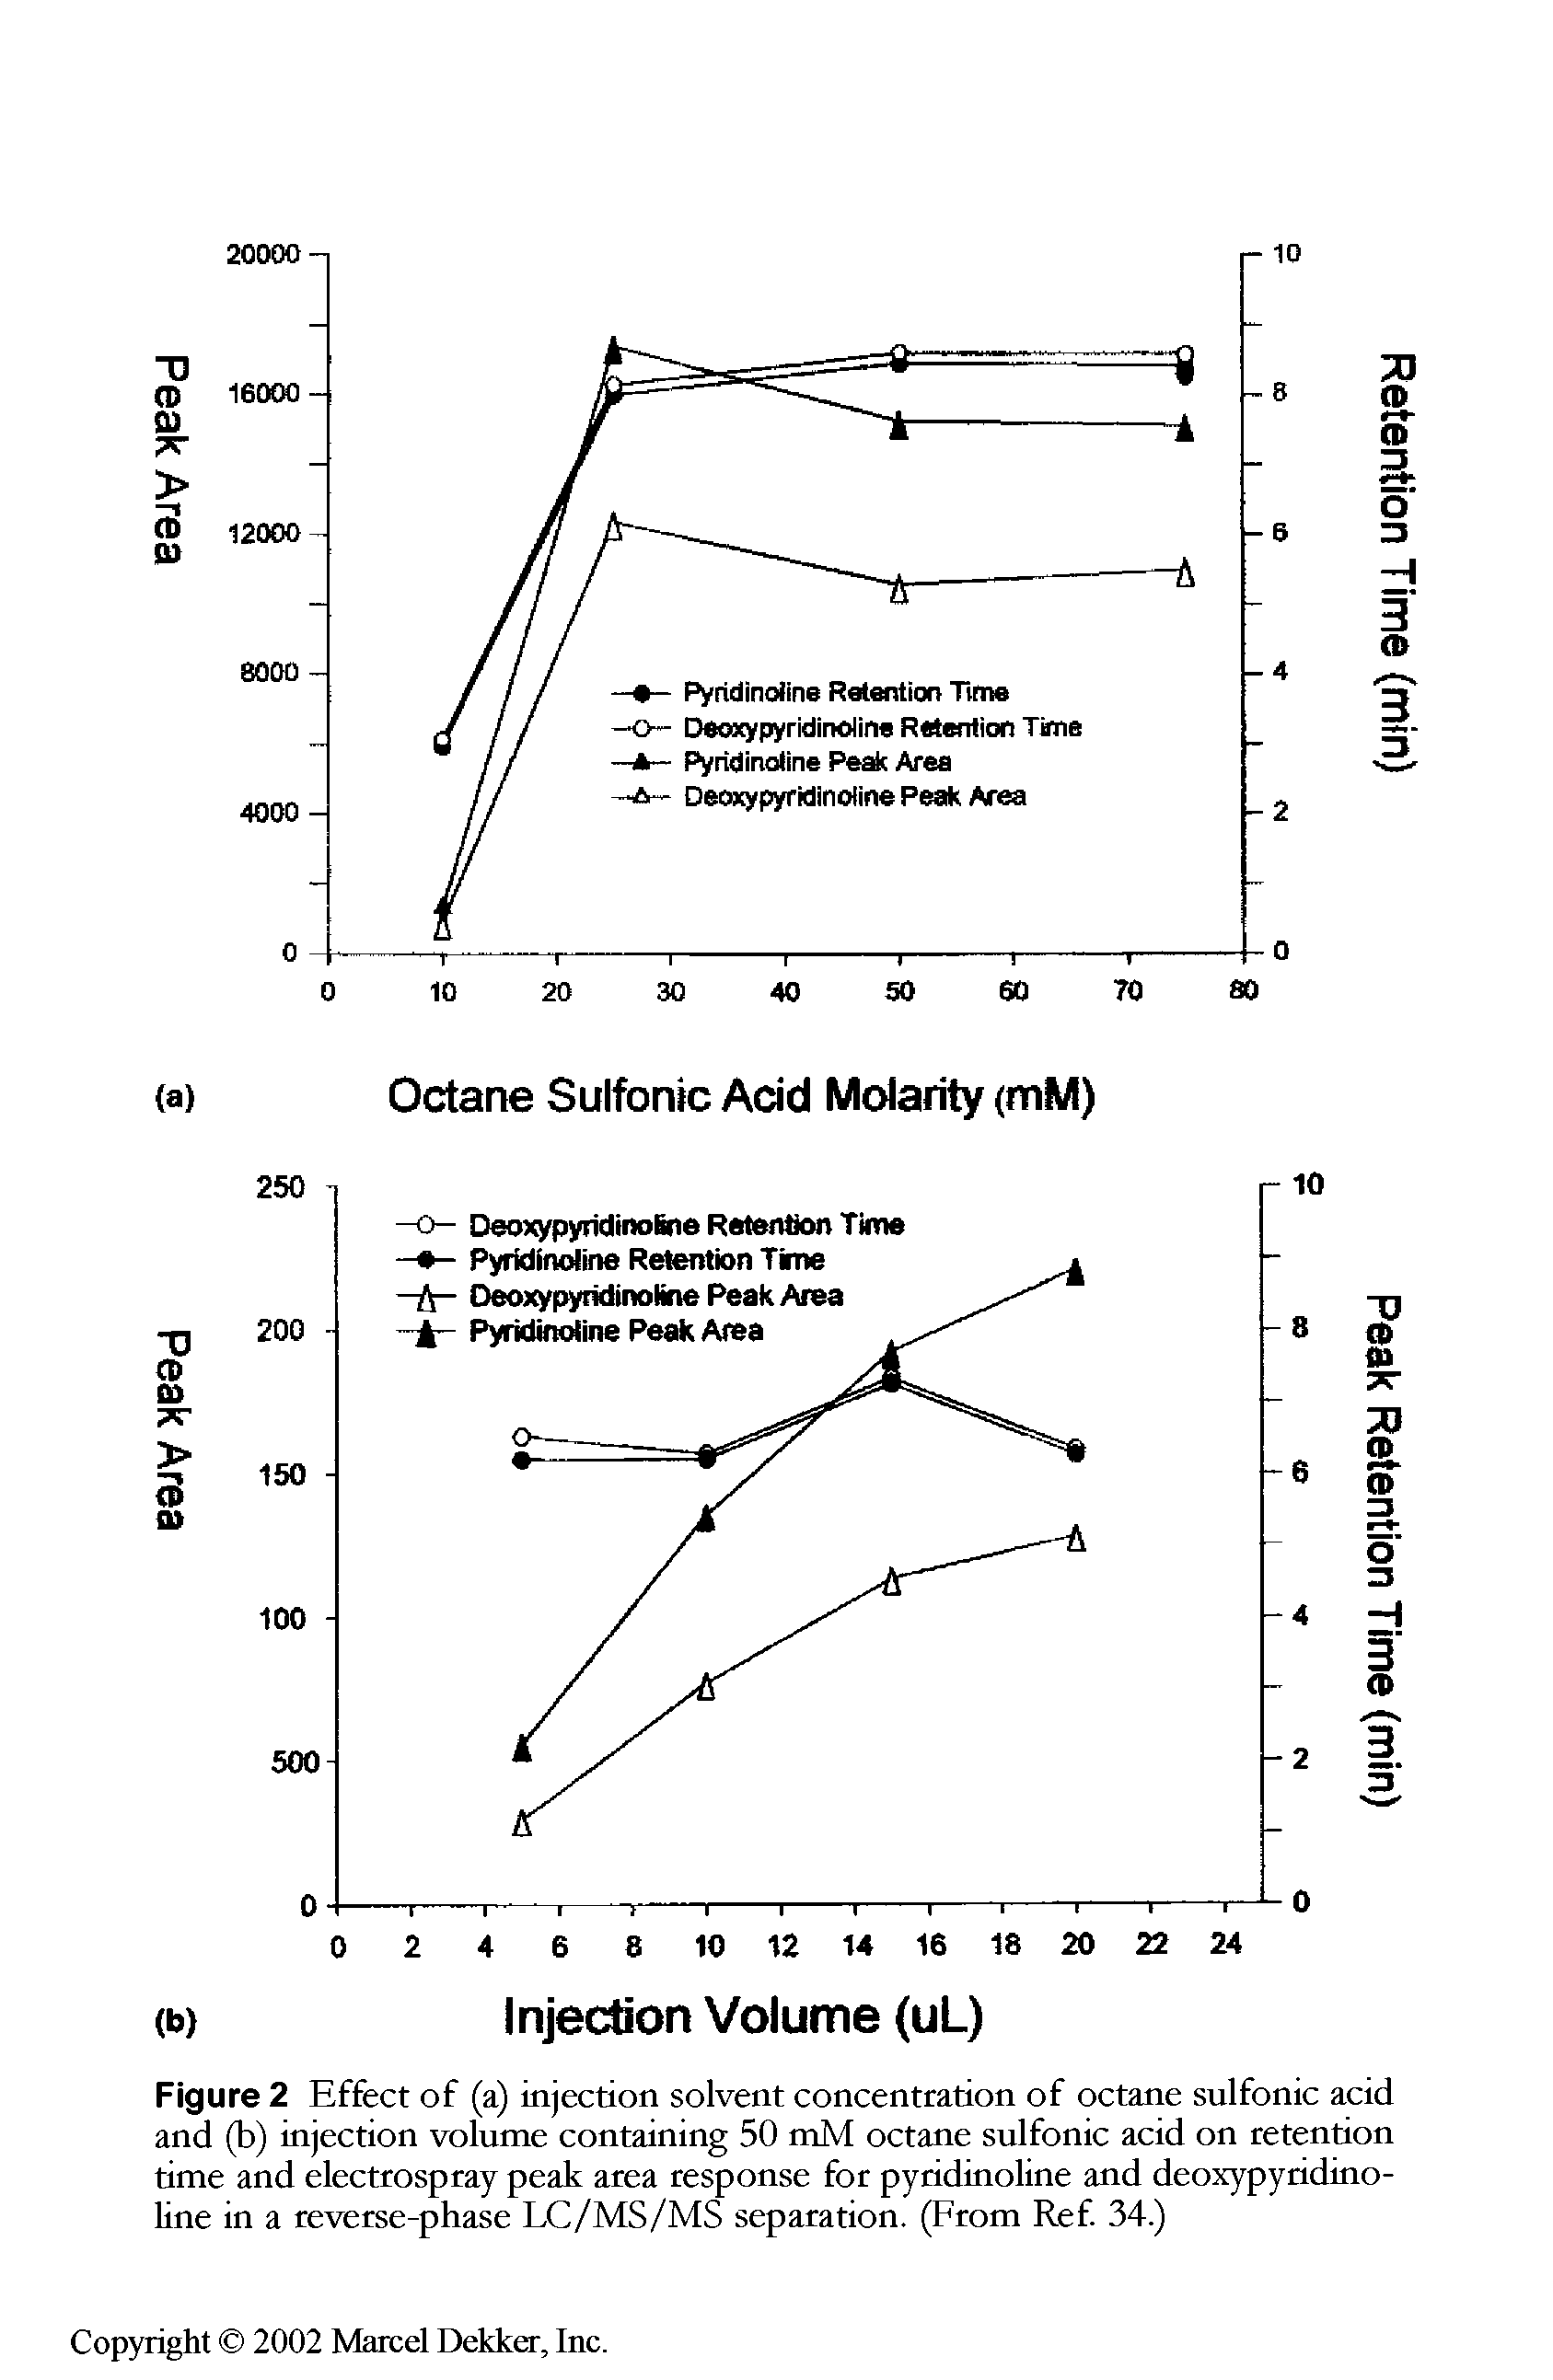 Figure 2 Effect of (a) injection solvent concentration of octane sulfonic acid and (b) injection volume containing 50 mM octane sulfonic acid on retention time and electrospray peak area response for pyridinoline and deoxypyridino-line in a reverse-phase LC/MS/MS separation. (From Ref 34.)...